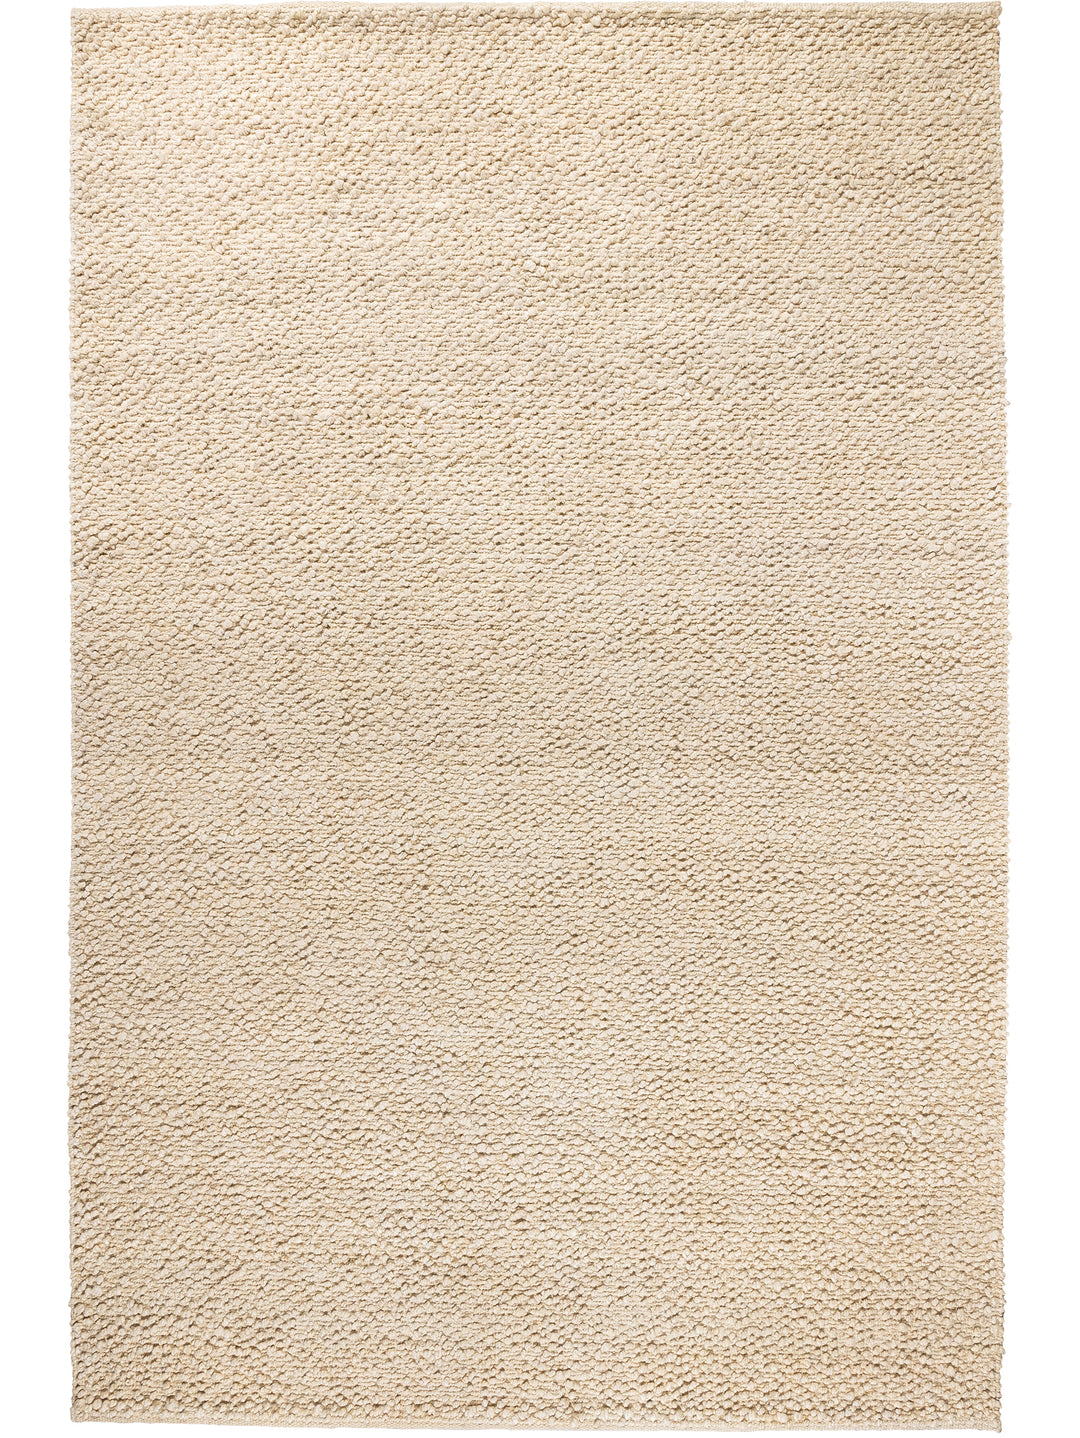 French Boucle Rug in Ivory